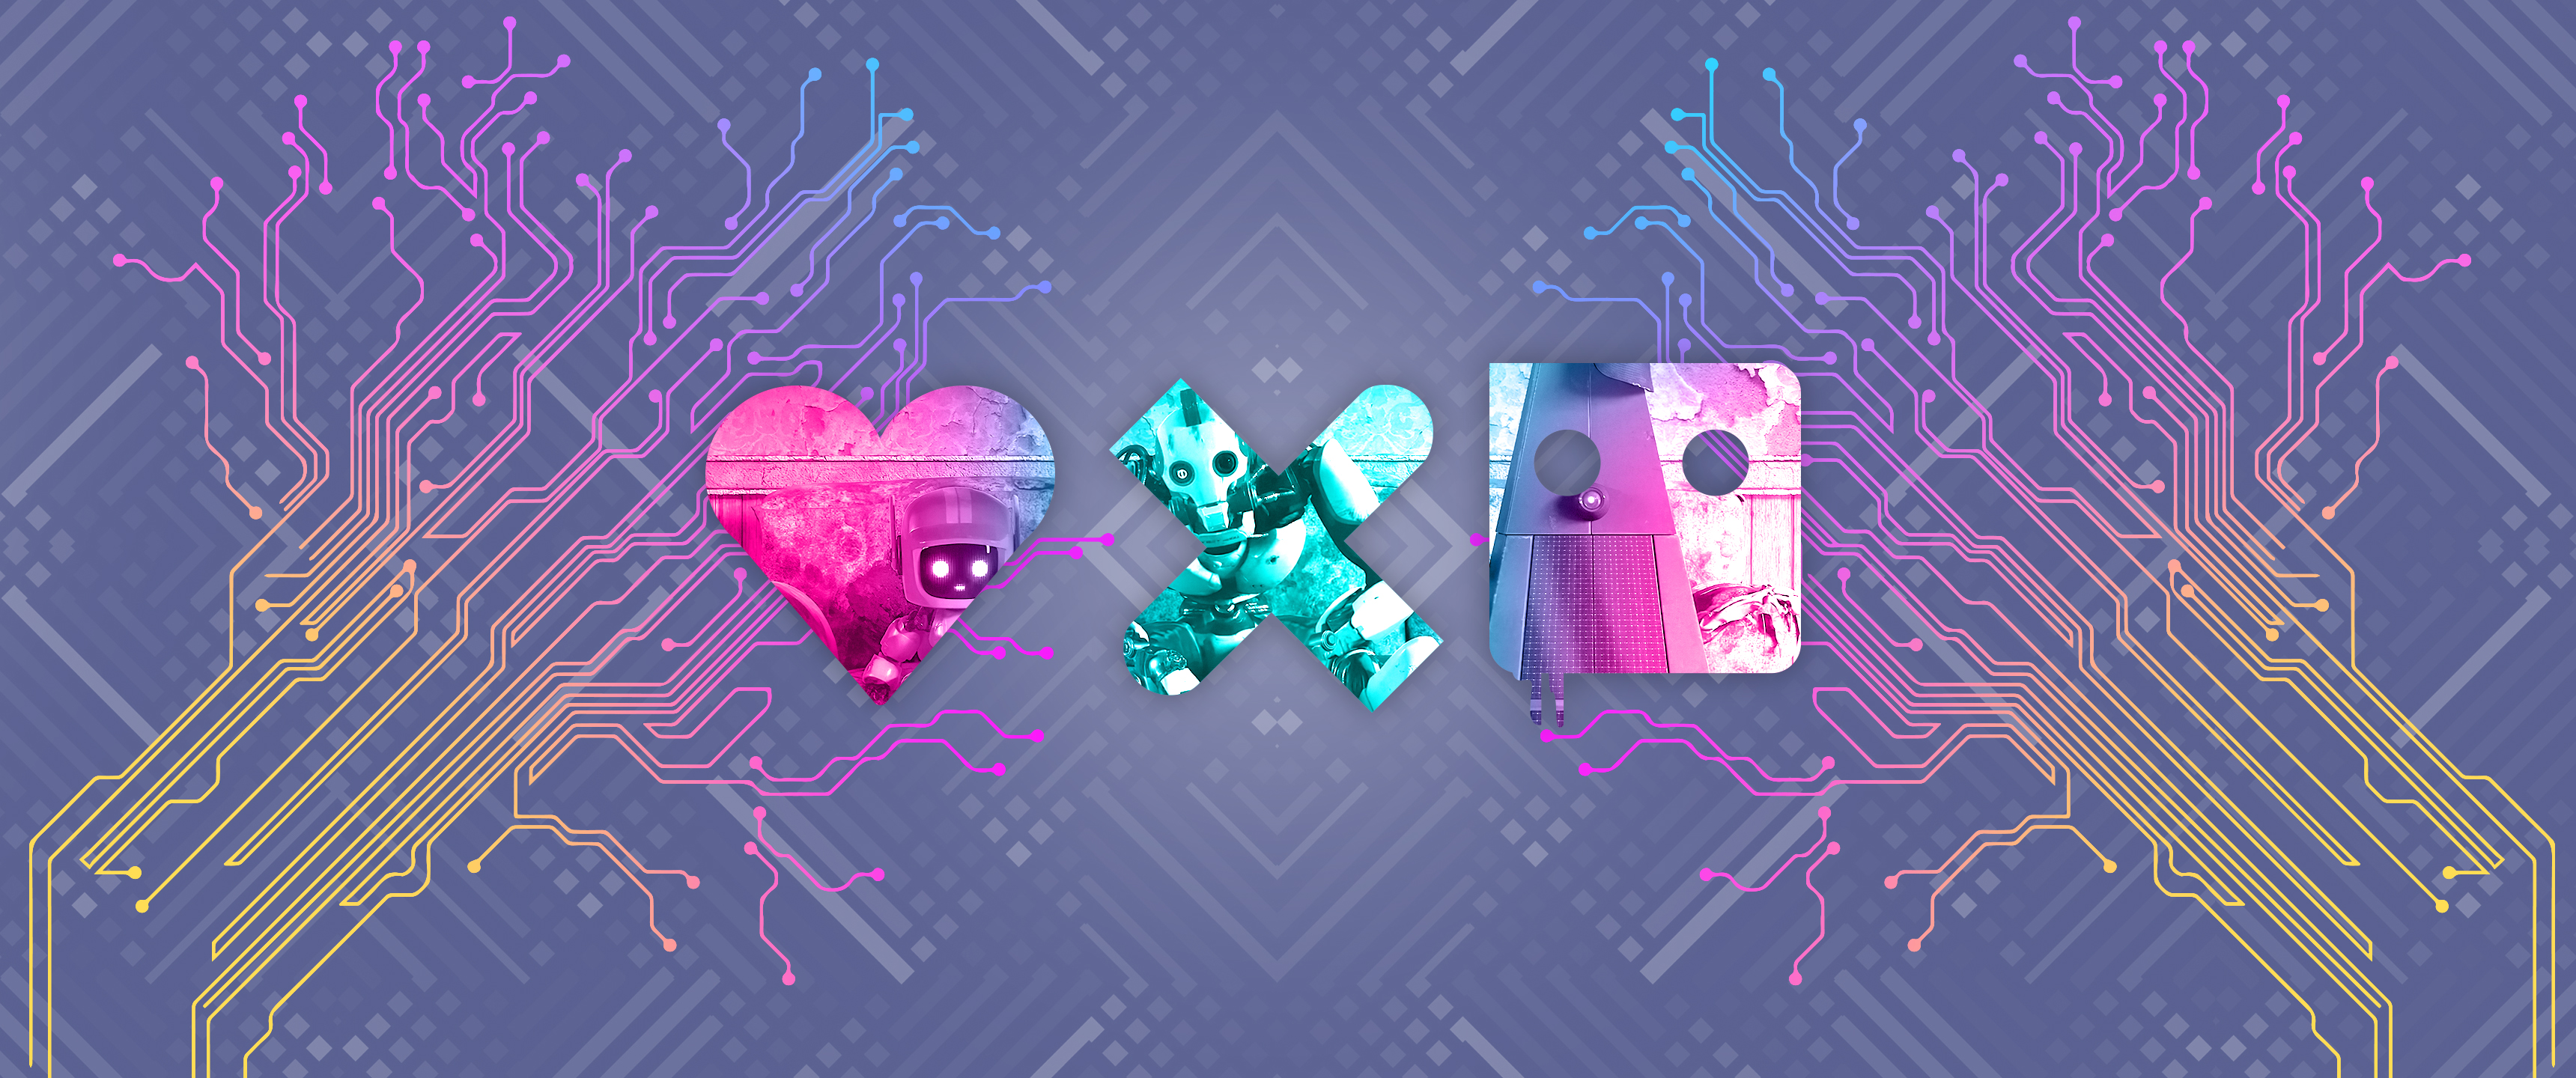 Love Death And Robots Wallpapers